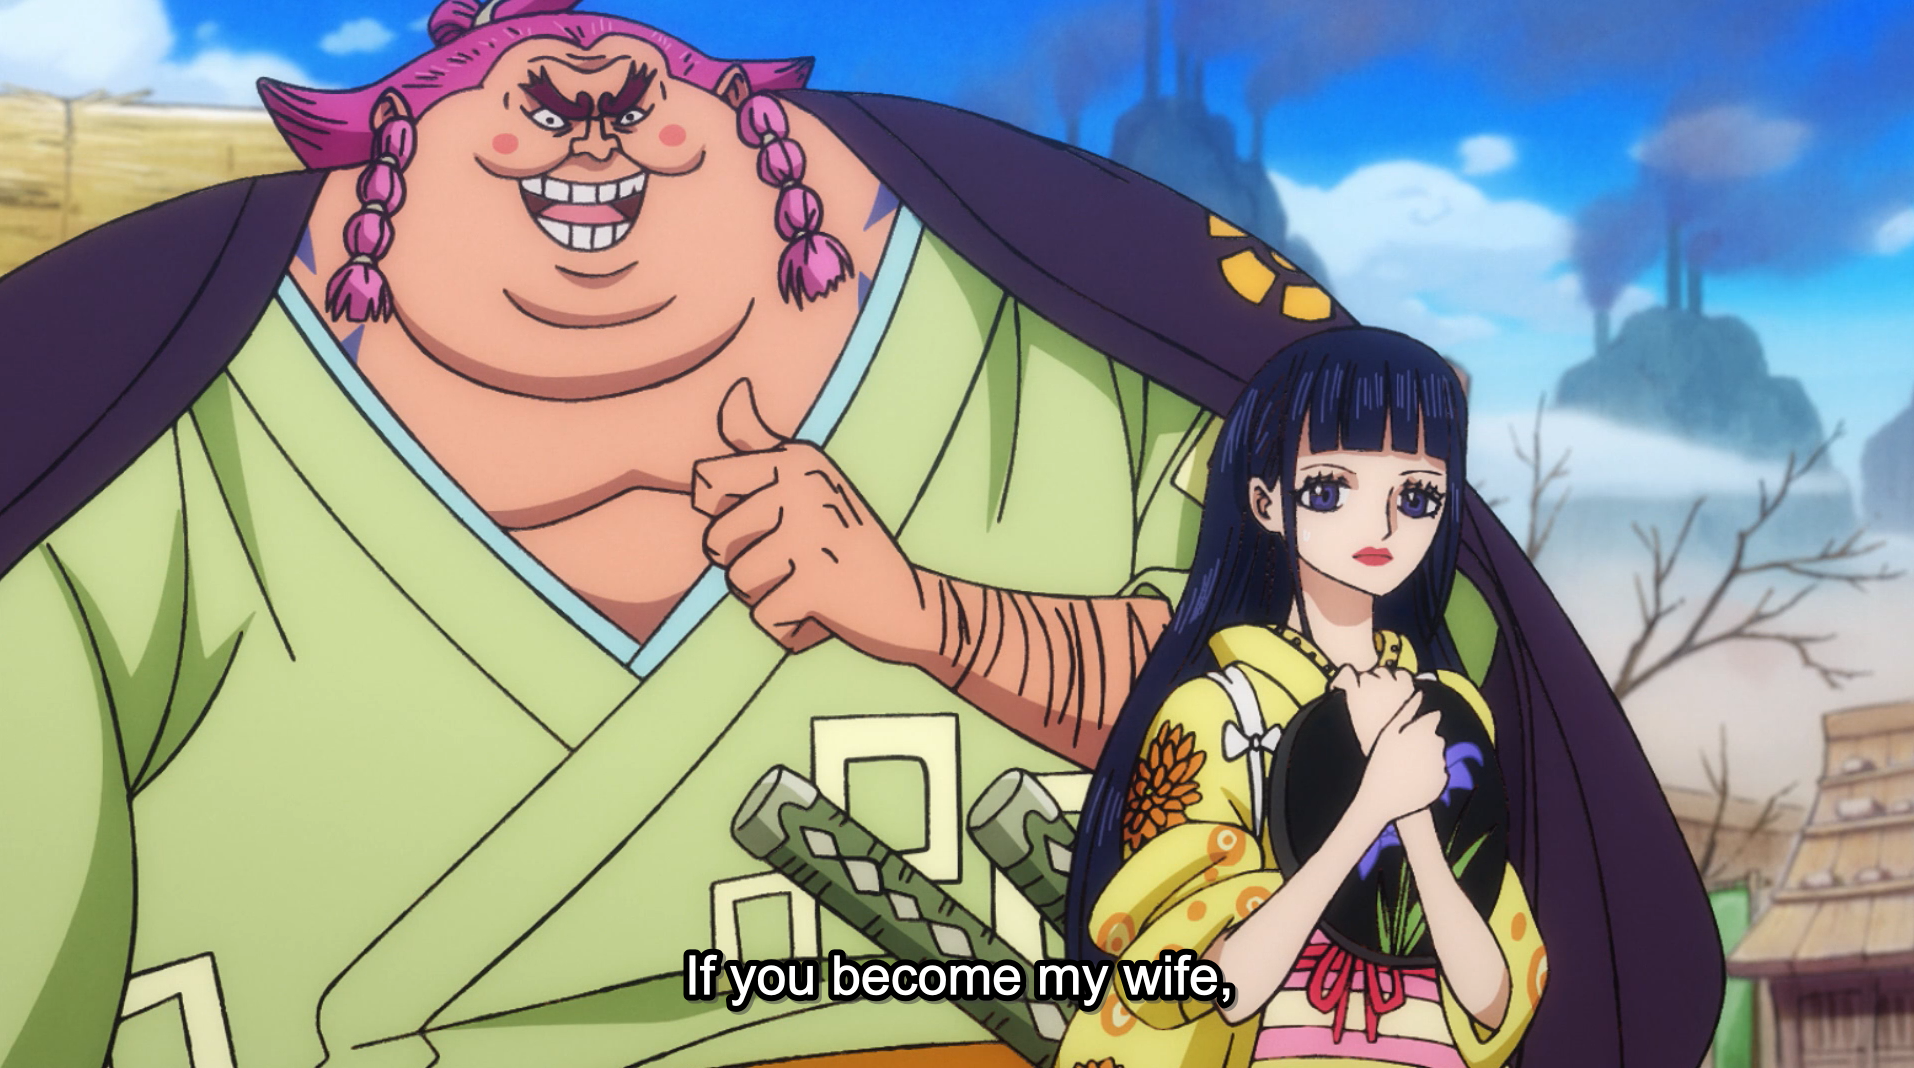 beth cmt recommends One Piece 899 Raw